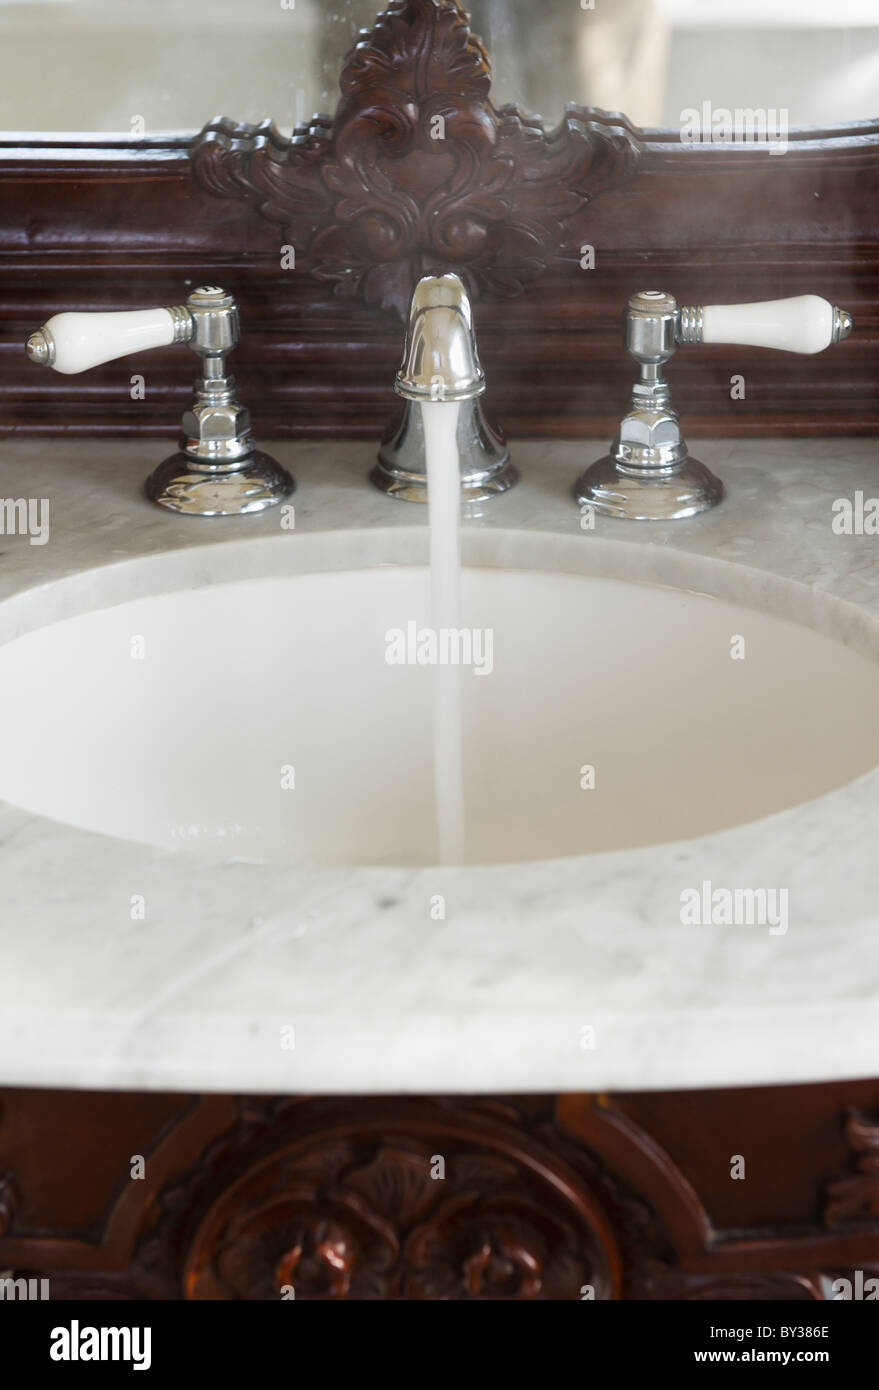 Bathroom sink with hot water running Stock Photo